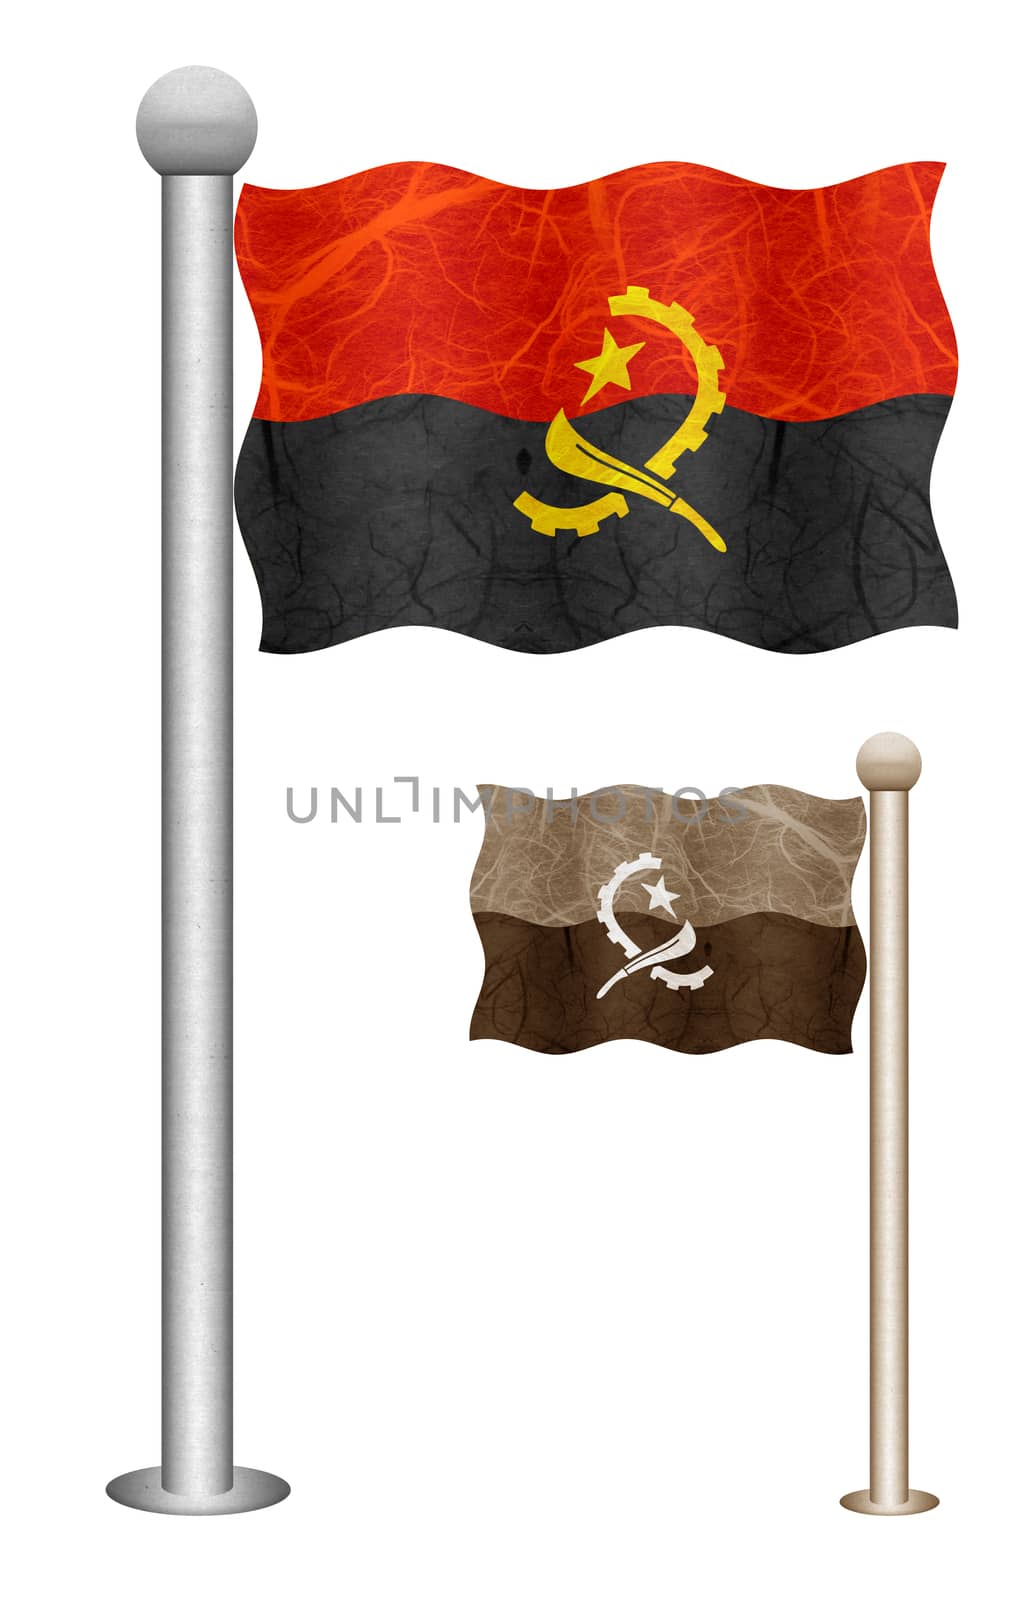 Angola flag waving on the wind. Flags of countries in Africa. Mulberry paper on white background.